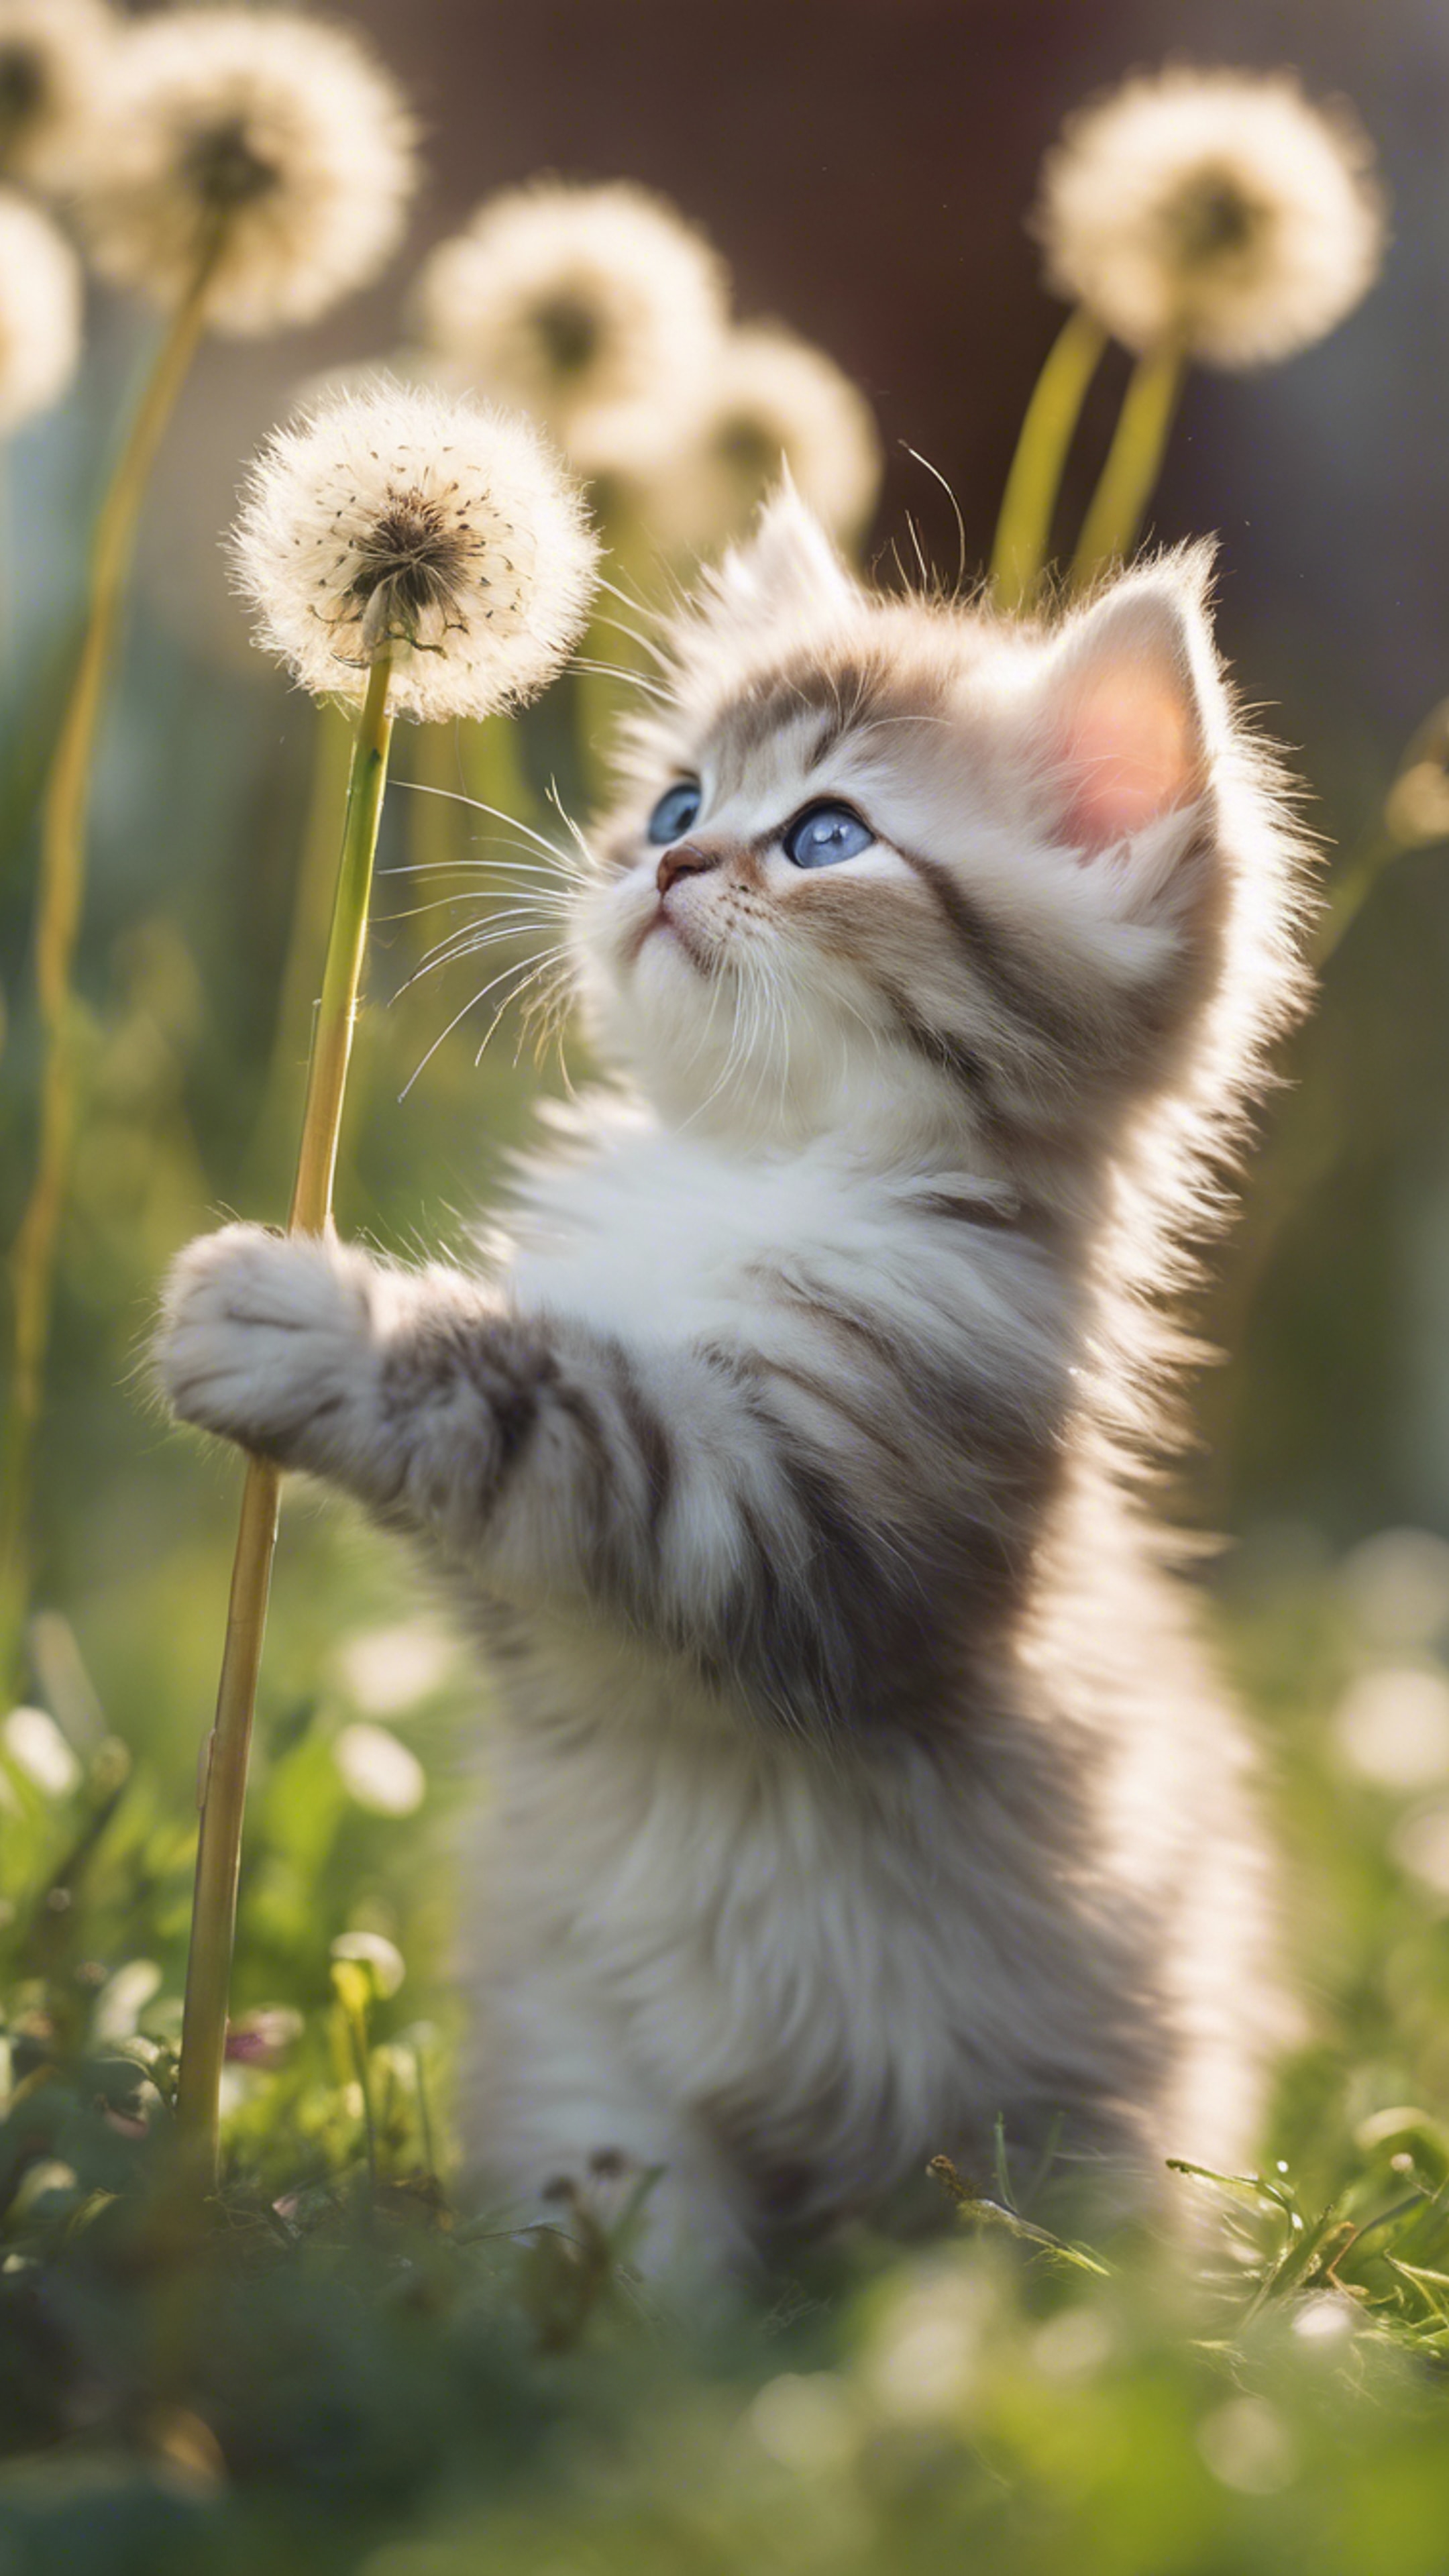 A curious Persian kitten playfully batting at a dandelishion puff in the midst of spring bloom. Fond d'écran[a1f5779e66044a4f83a1]